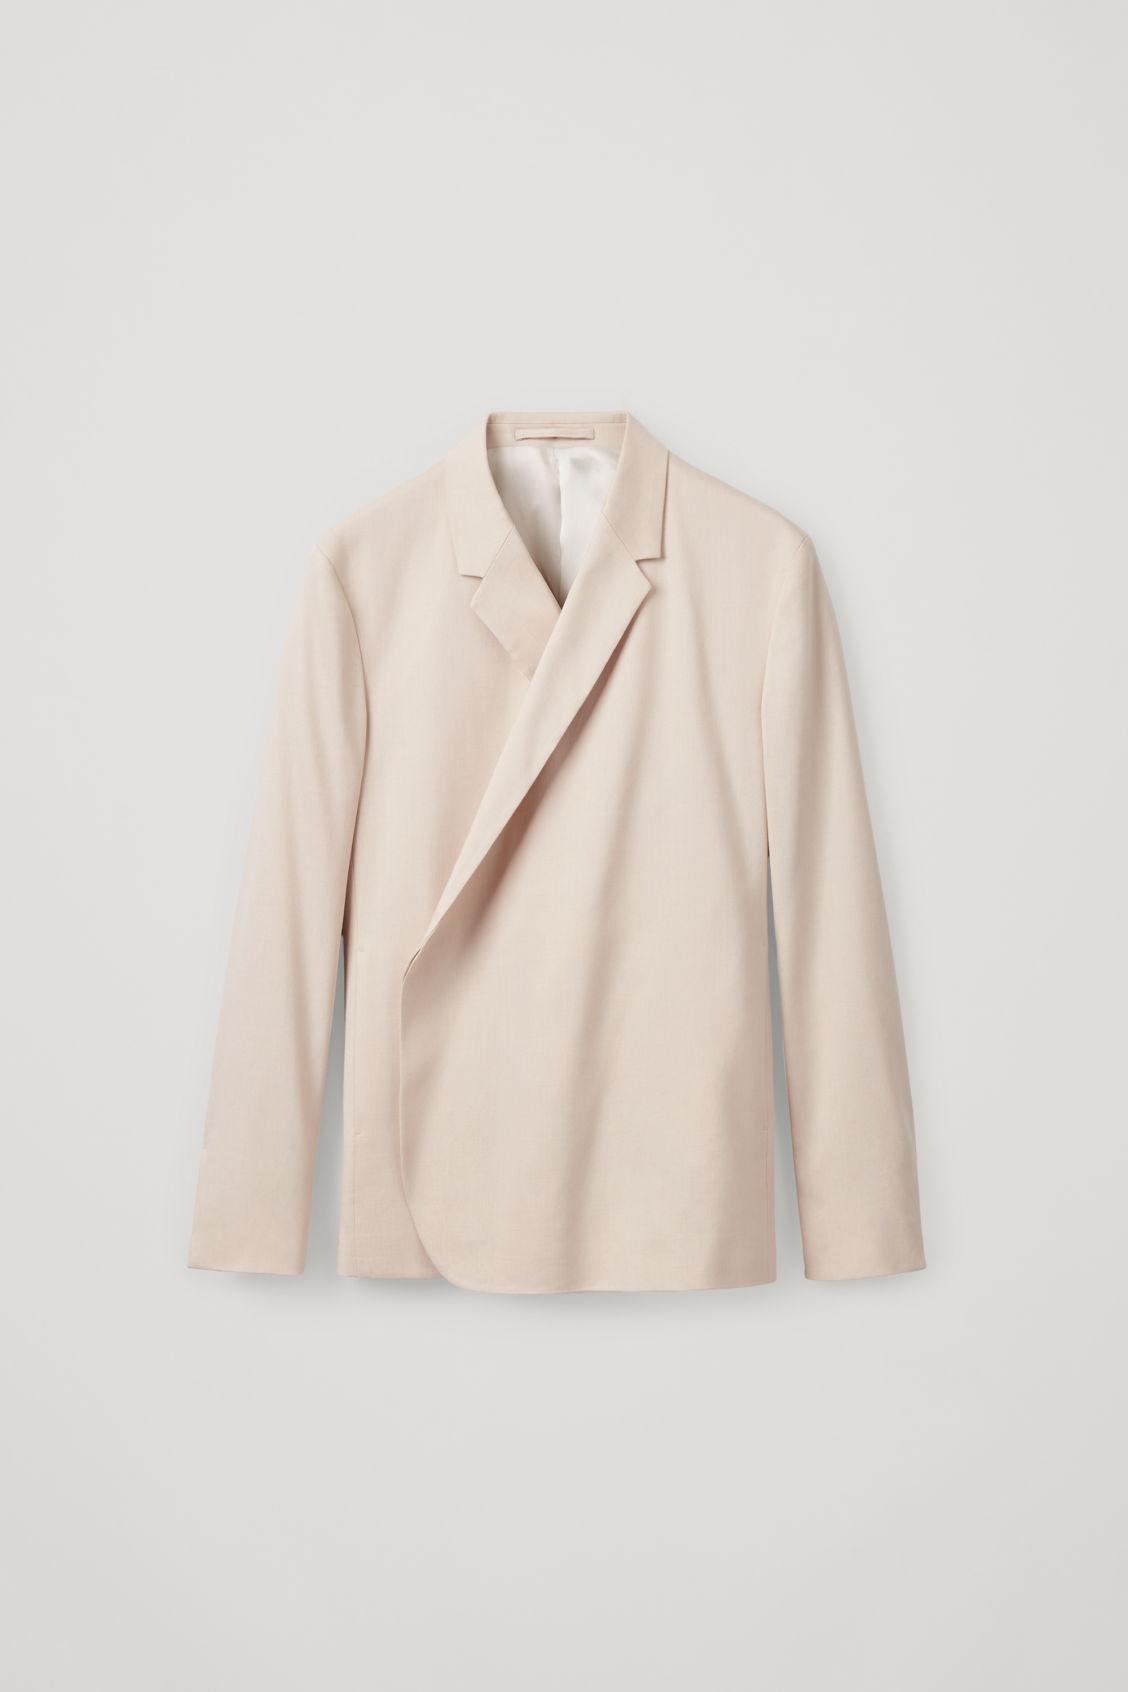 COS Linen-mix Wrap Blazer in Natural for Men | Lyst